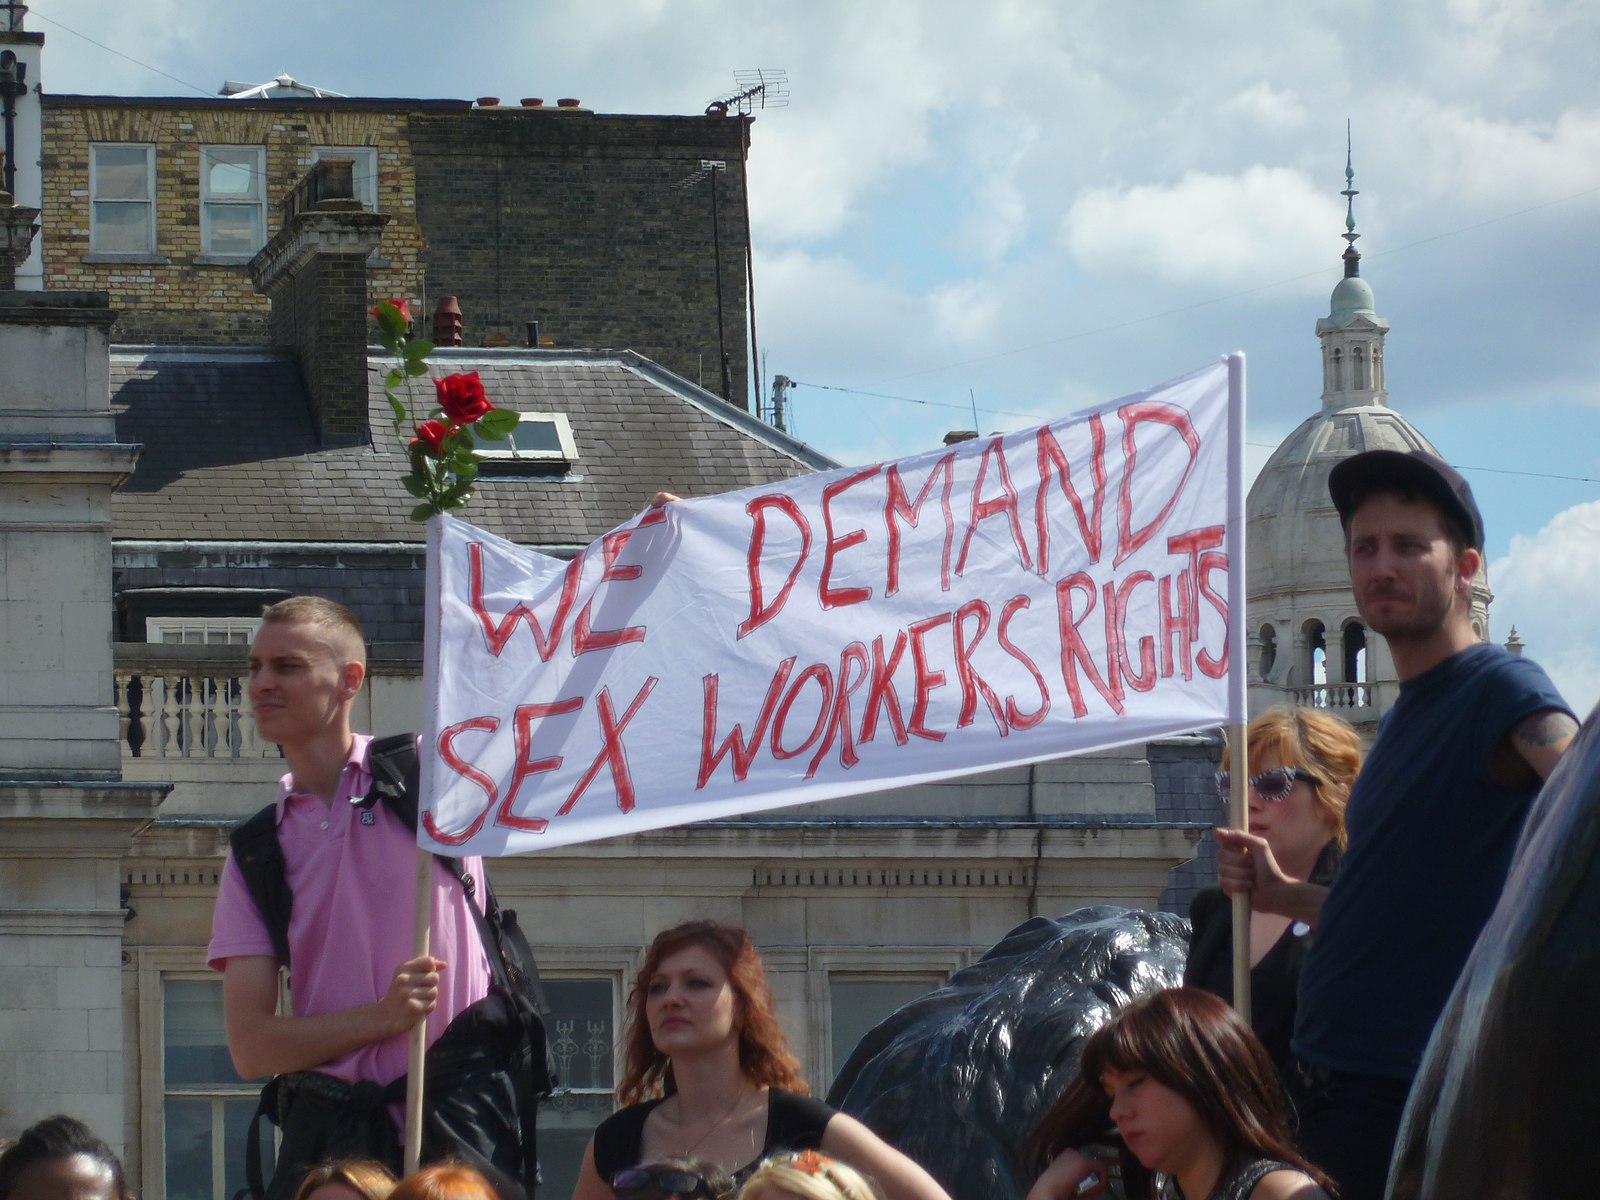 This is a photo from the 2011 Slut Walks in the United Kingdom. Protestors are holding a large banner that reads “We Demand Sex Worker’s Rights,” in red font.